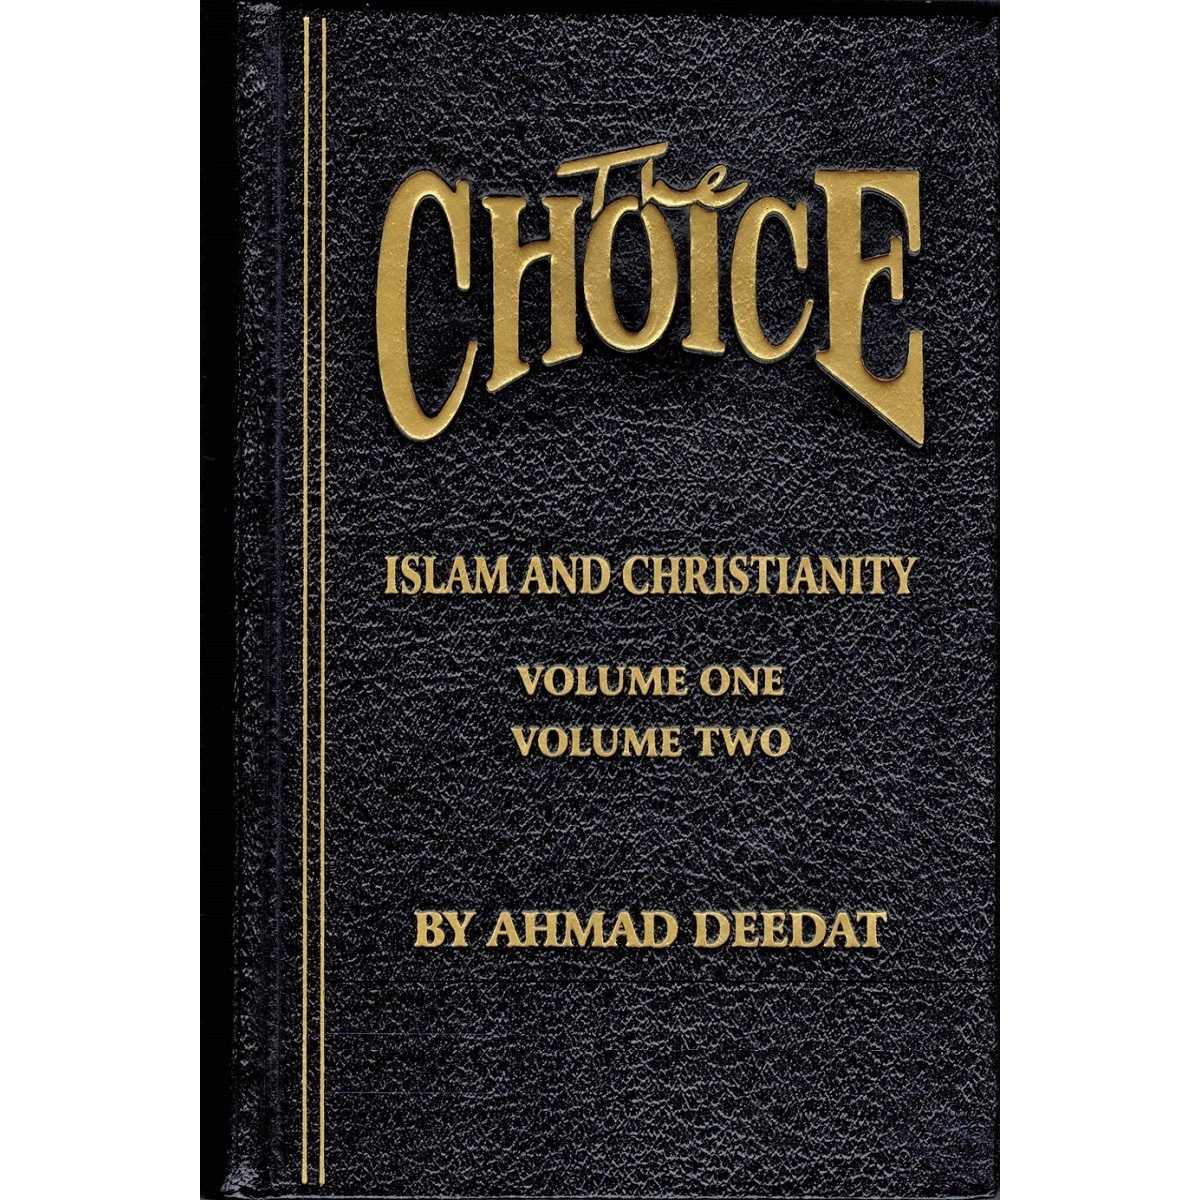 The Choice Islam and Christianity (Volume 1 & 2) By Ahmed Deedat